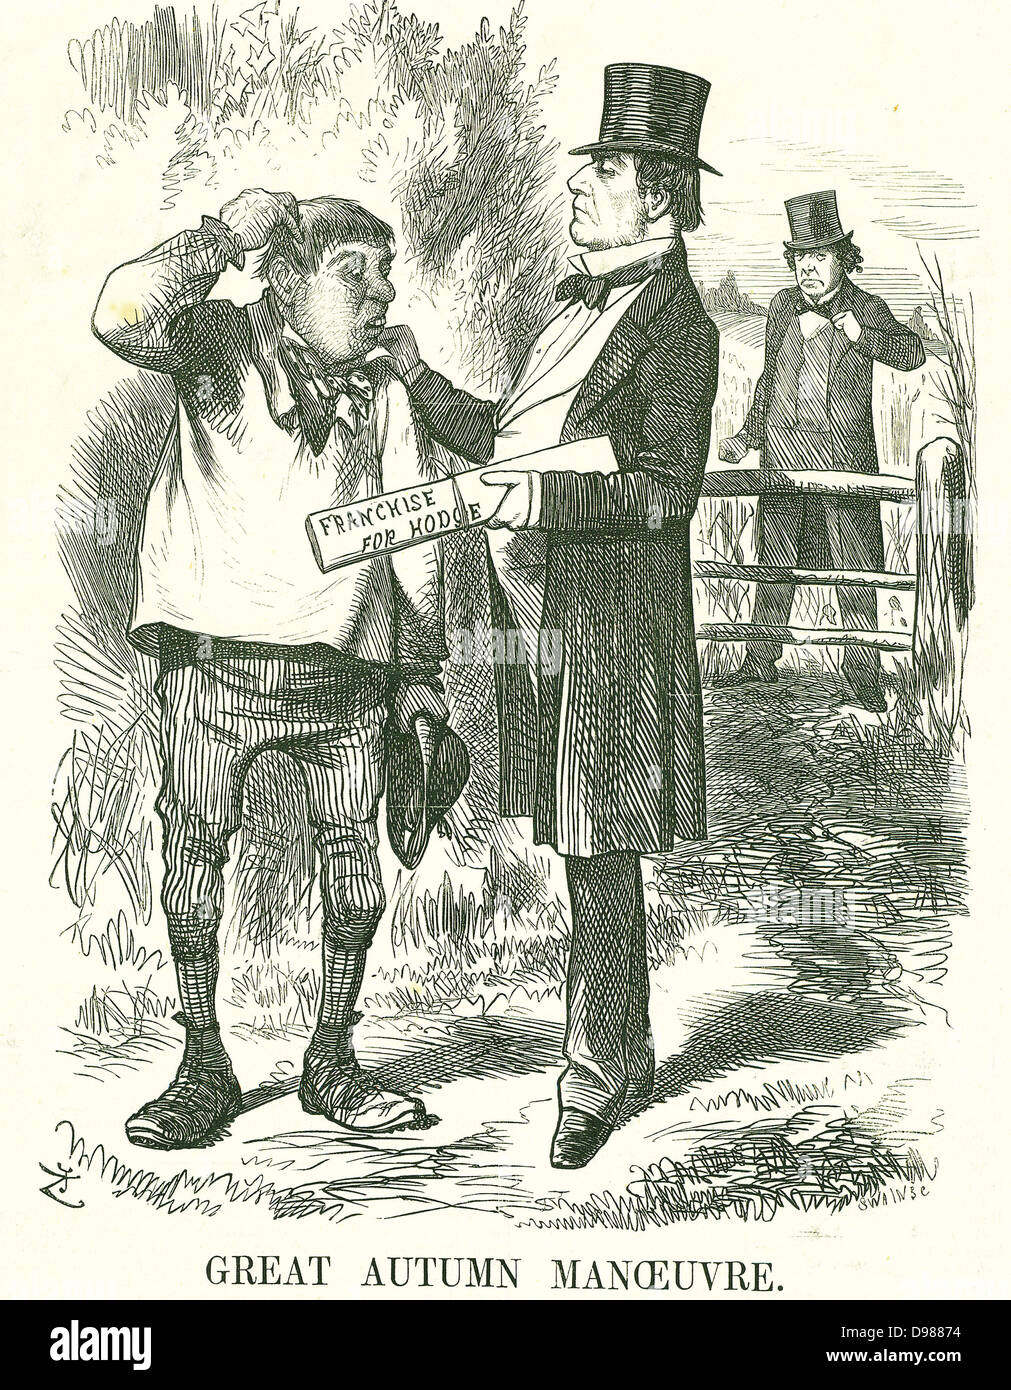 Great Autumn Manoeuvre': Gladstone thought that eventually the vote must be given to agricultural labourers (Hodge). At this time his premiership was shaky and Disraeli is waiting to take his place. John Tenniel cartoon from 'Punch', London, 9 August 1873. Stock Photo